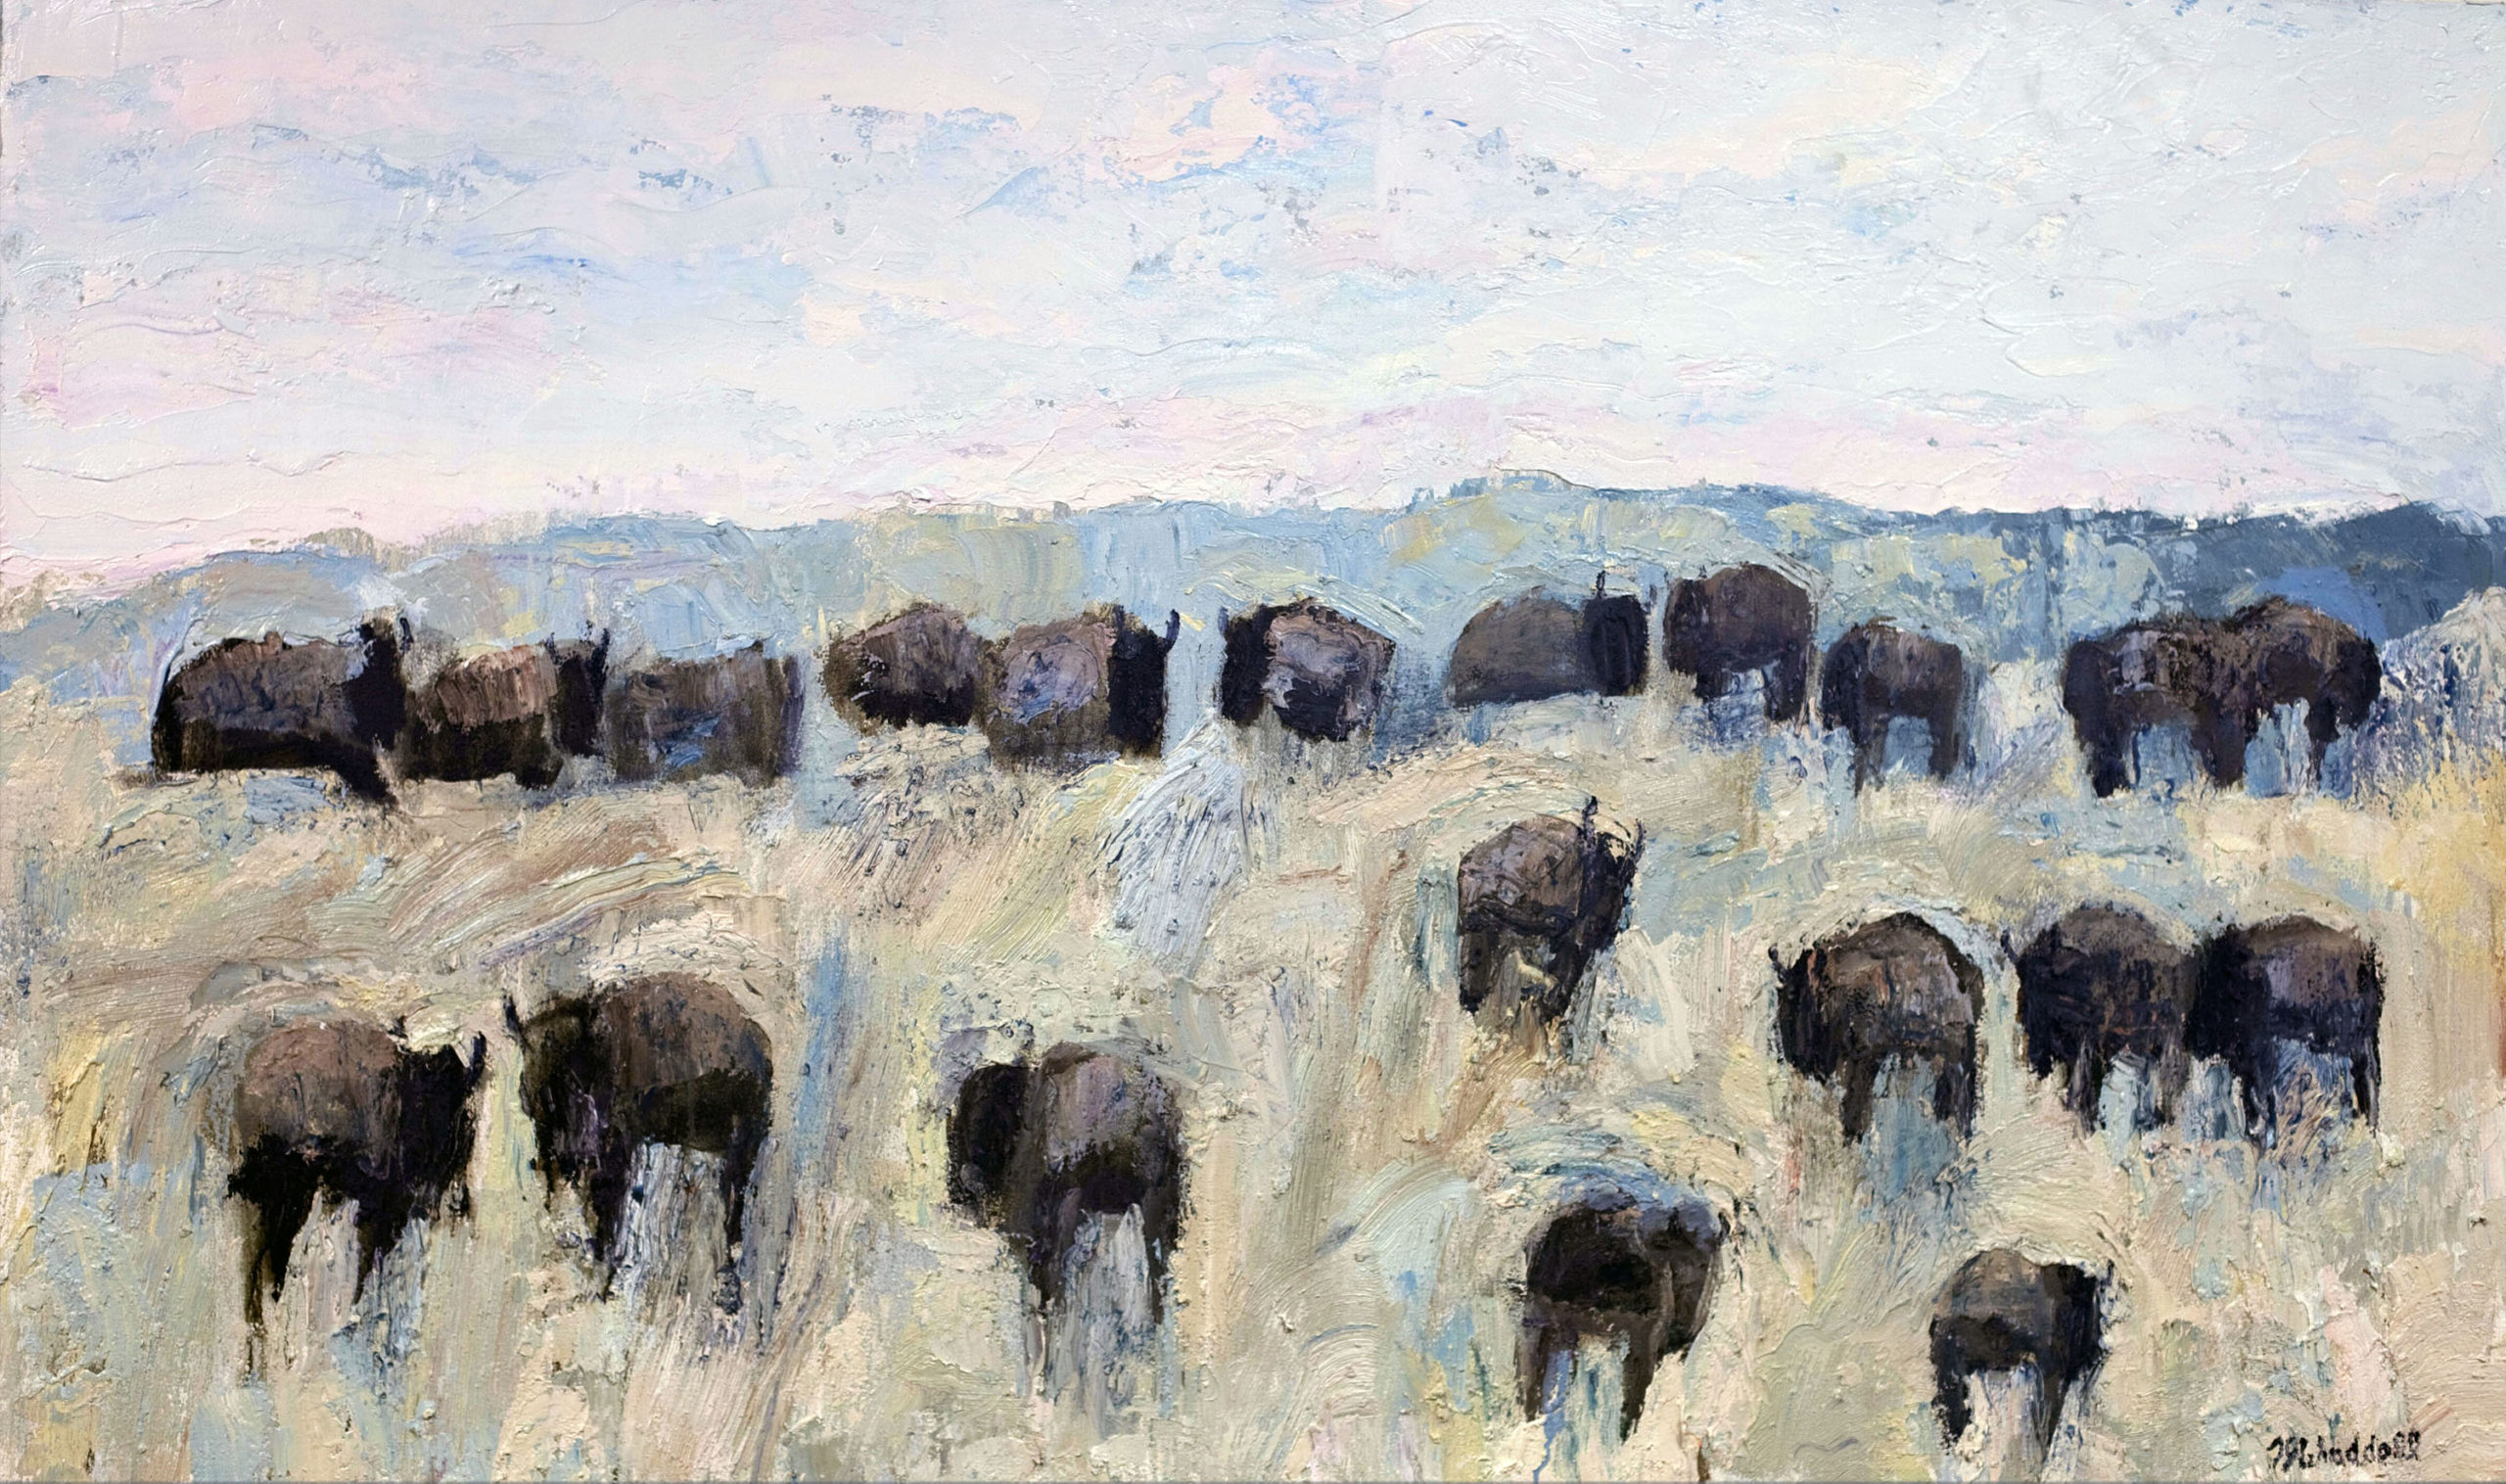 

											</b>

											<em>
												Lure of the West: Celebrating 50 Years of Gerald Peters Gallery  </em> 

											<h4>
												New York: April 29 - May 27, 2022											</h4>

		                																																<i>Theodore Waddell, Red Rock Buffalo #12,</i>  
																																								2022, 
																																								oil, encaustic on canvas, 
																																								36 x 60 inches 
																								
		                				